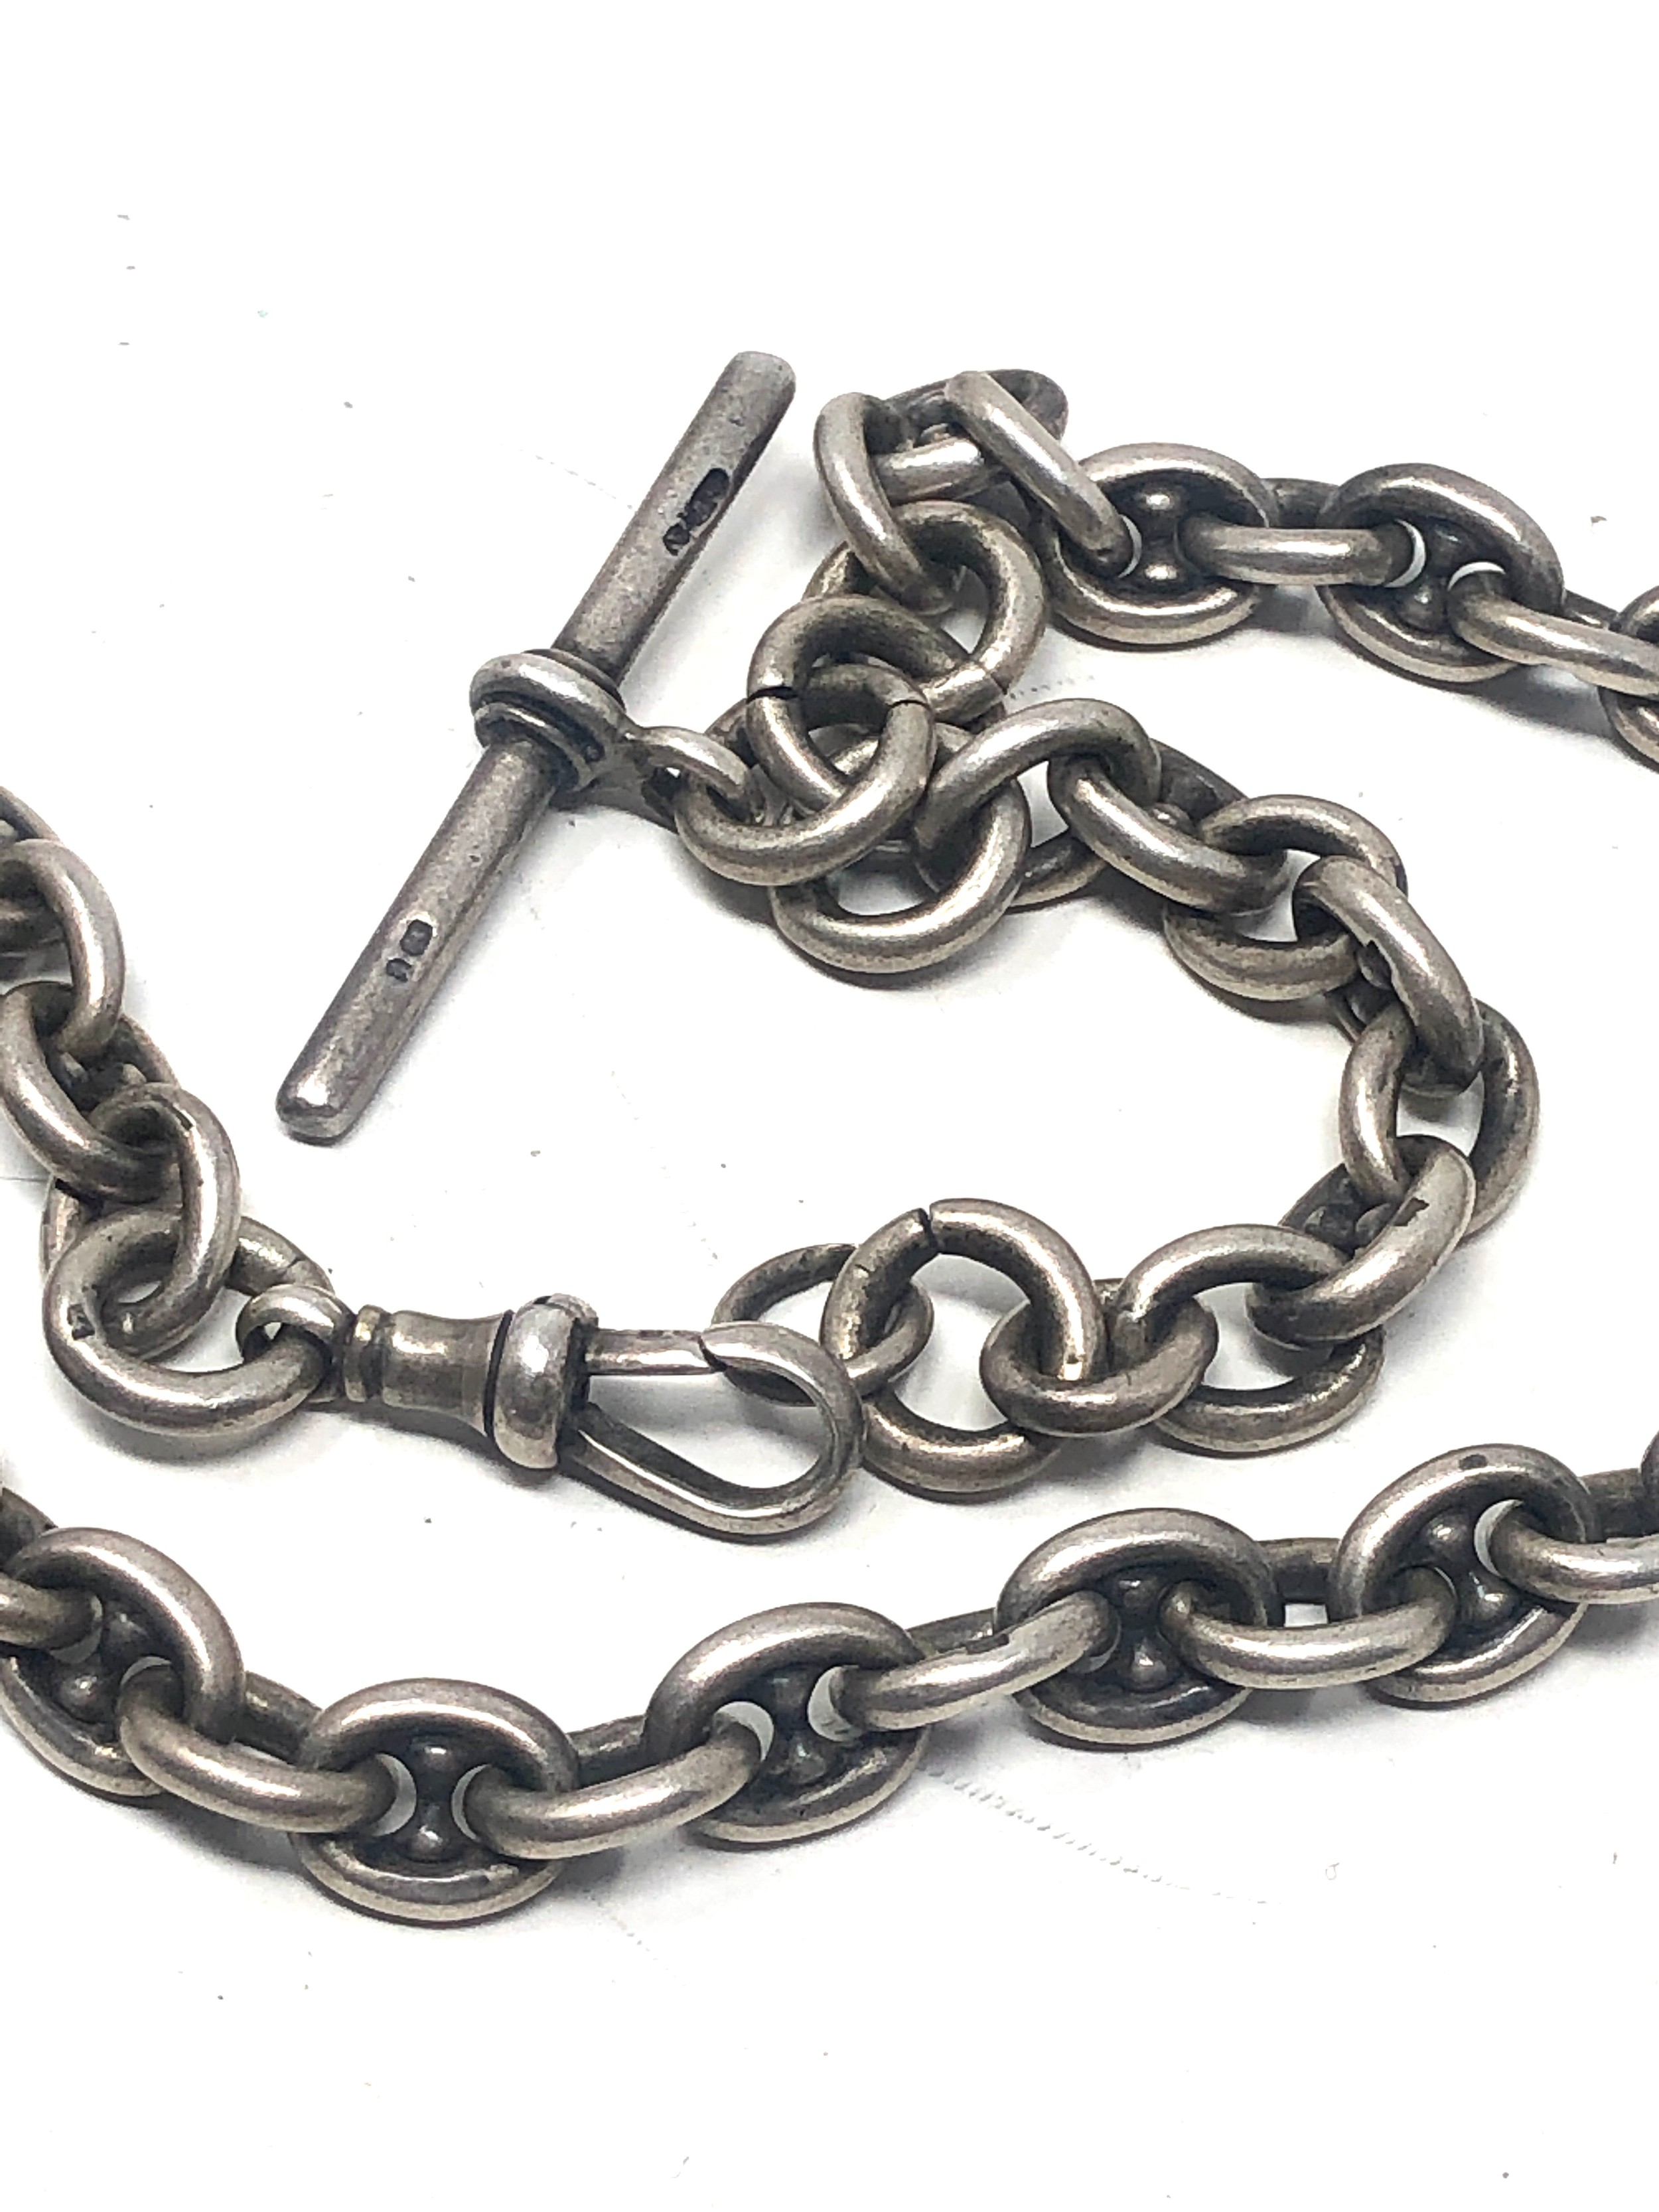 Antique silver albert watch chain 62g - Image 2 of 2